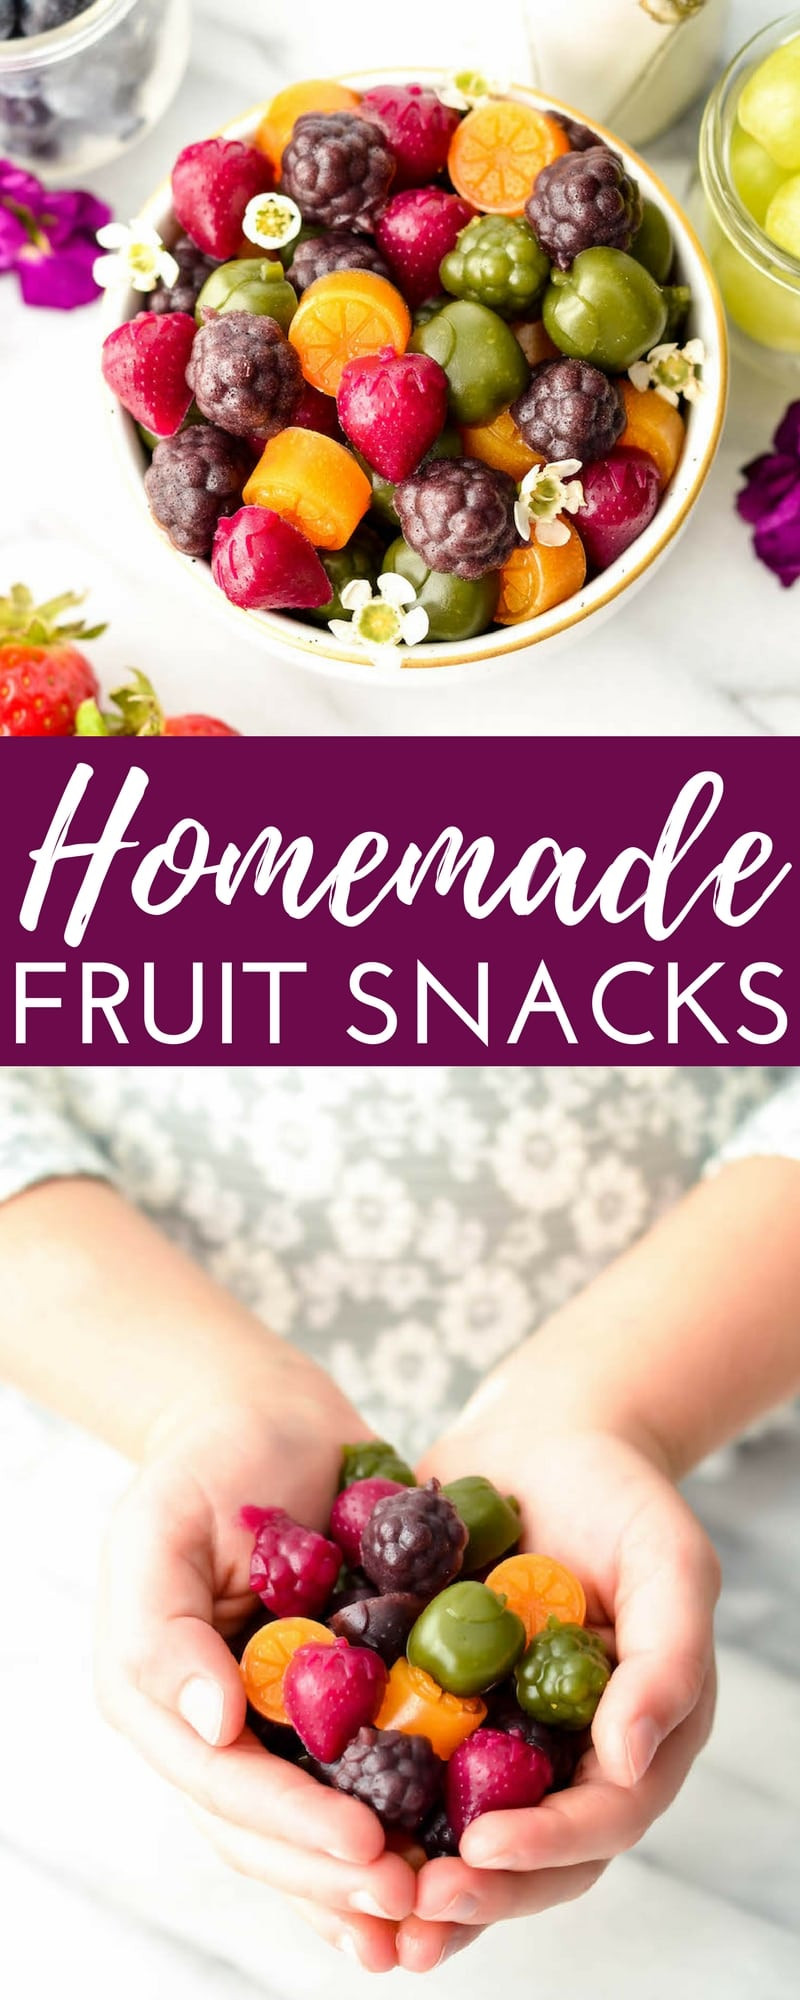 Are Welch'S Fruit Snacks Healthy
 Healthy Homemade Fruit Snacks with Whole Fruits & Veggies